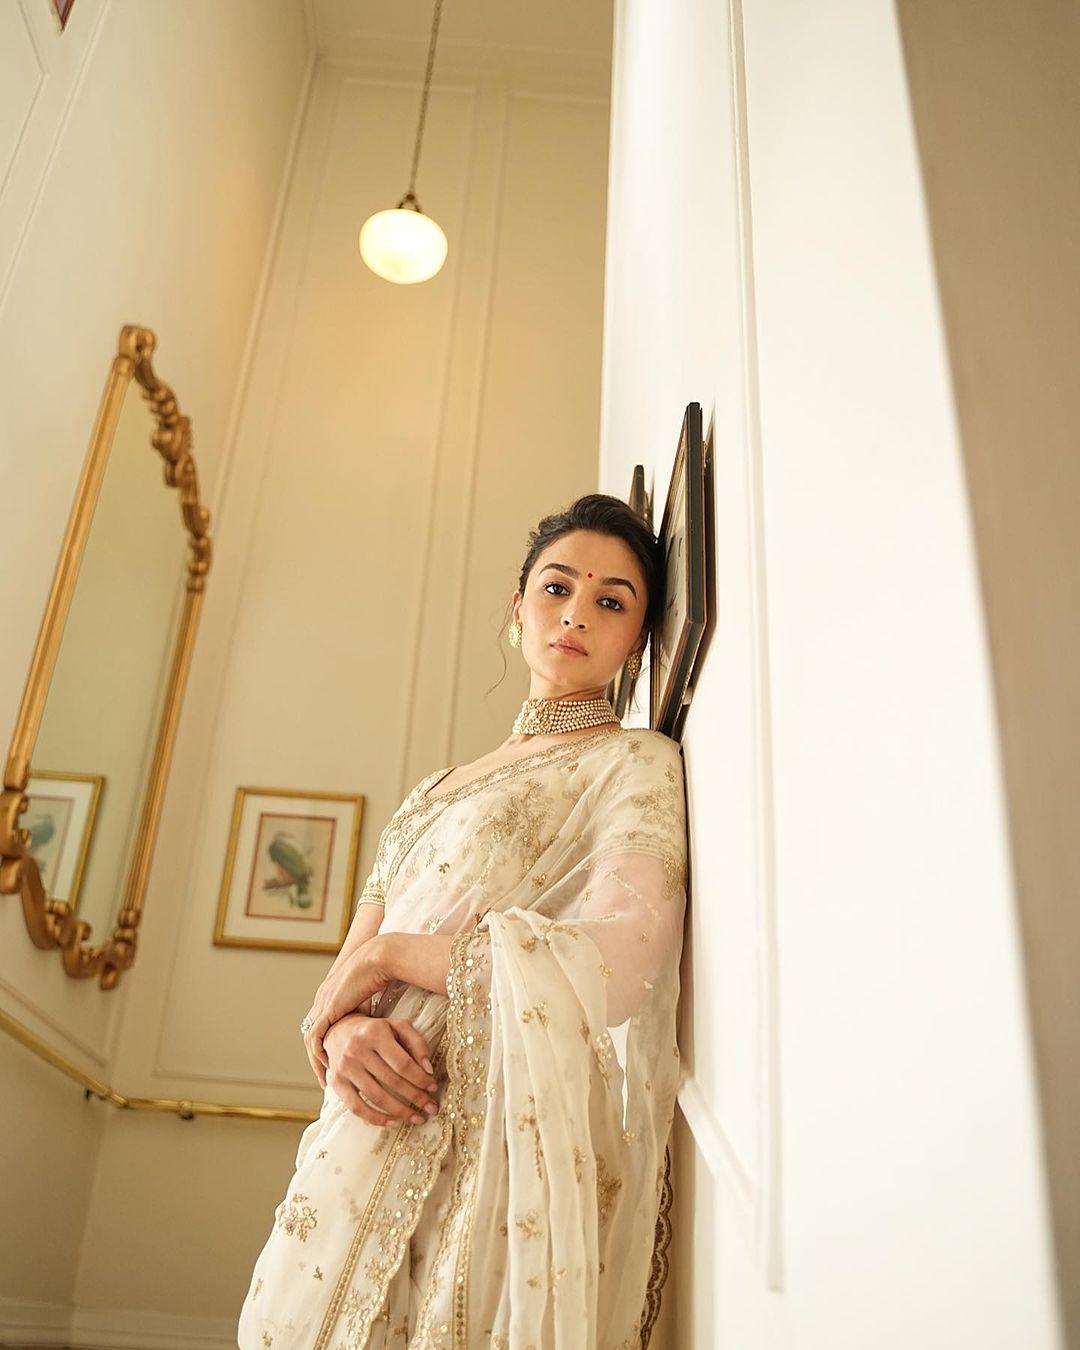 Alia complemented her look with a pearl necklace and earrings, and she pulled off the classic bun hairstyle with elegance